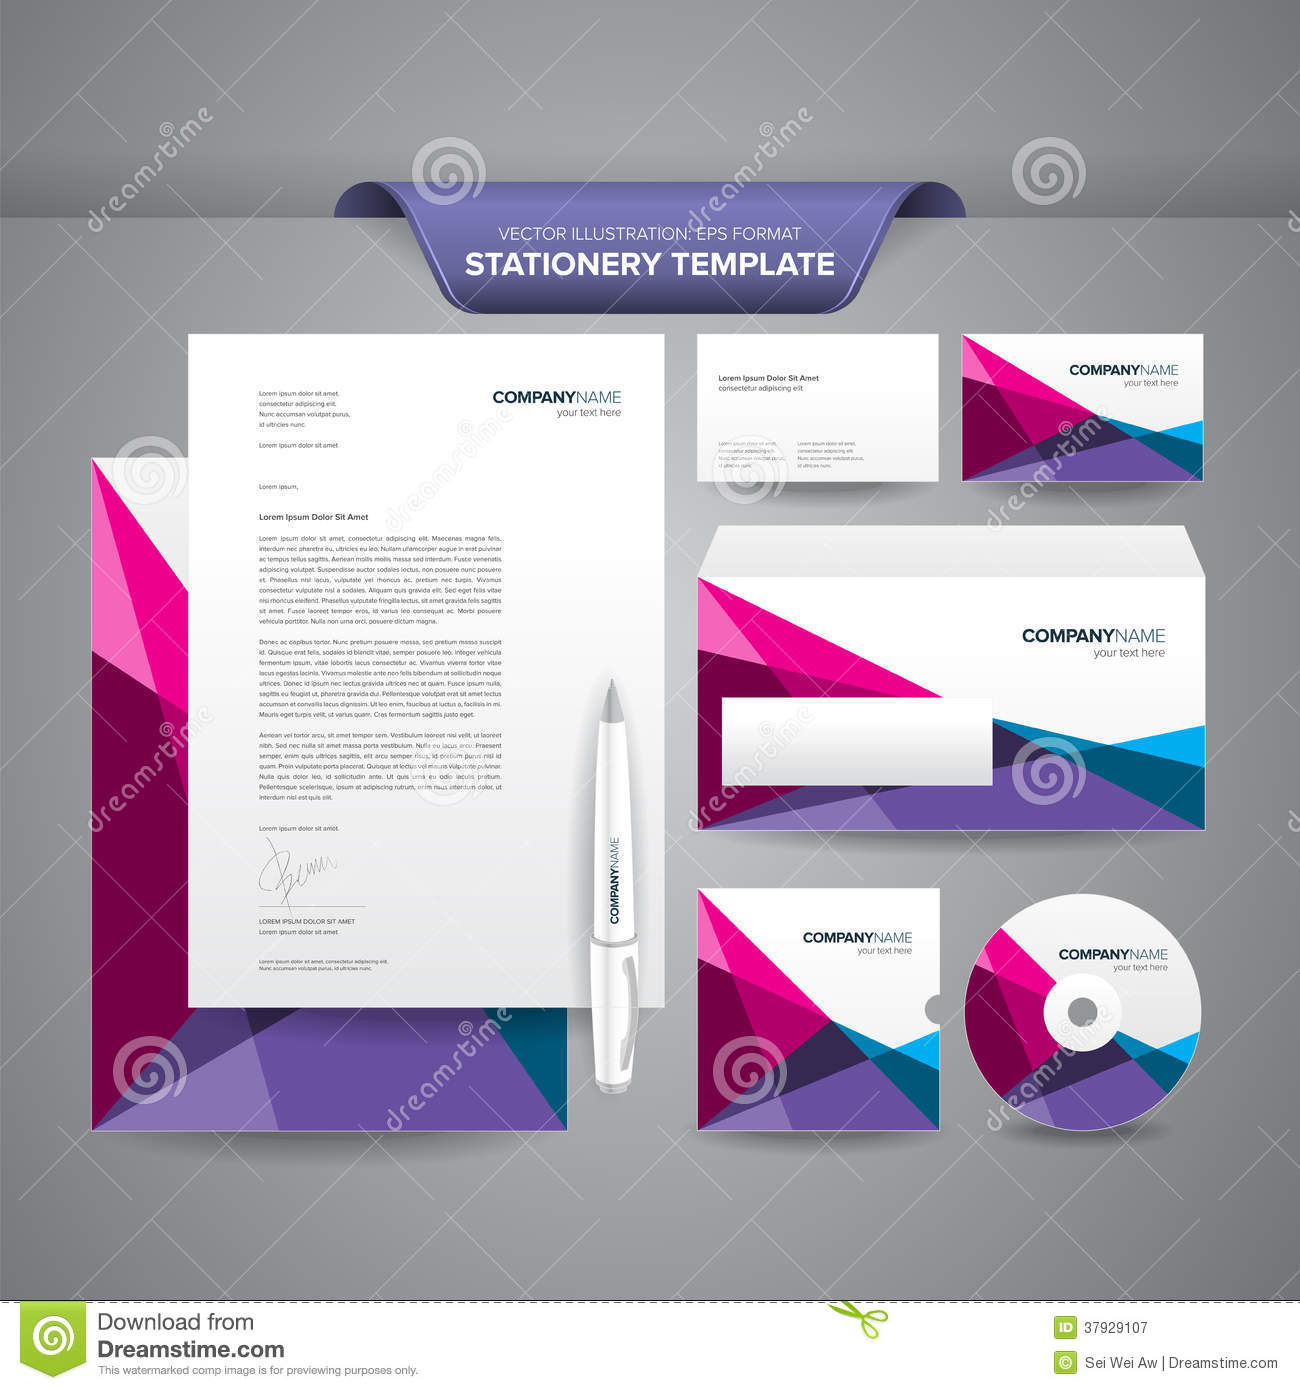 Stationery Template Polygonal Stock Vector – Illustration Of In Business Card Letterhead Envelope Template